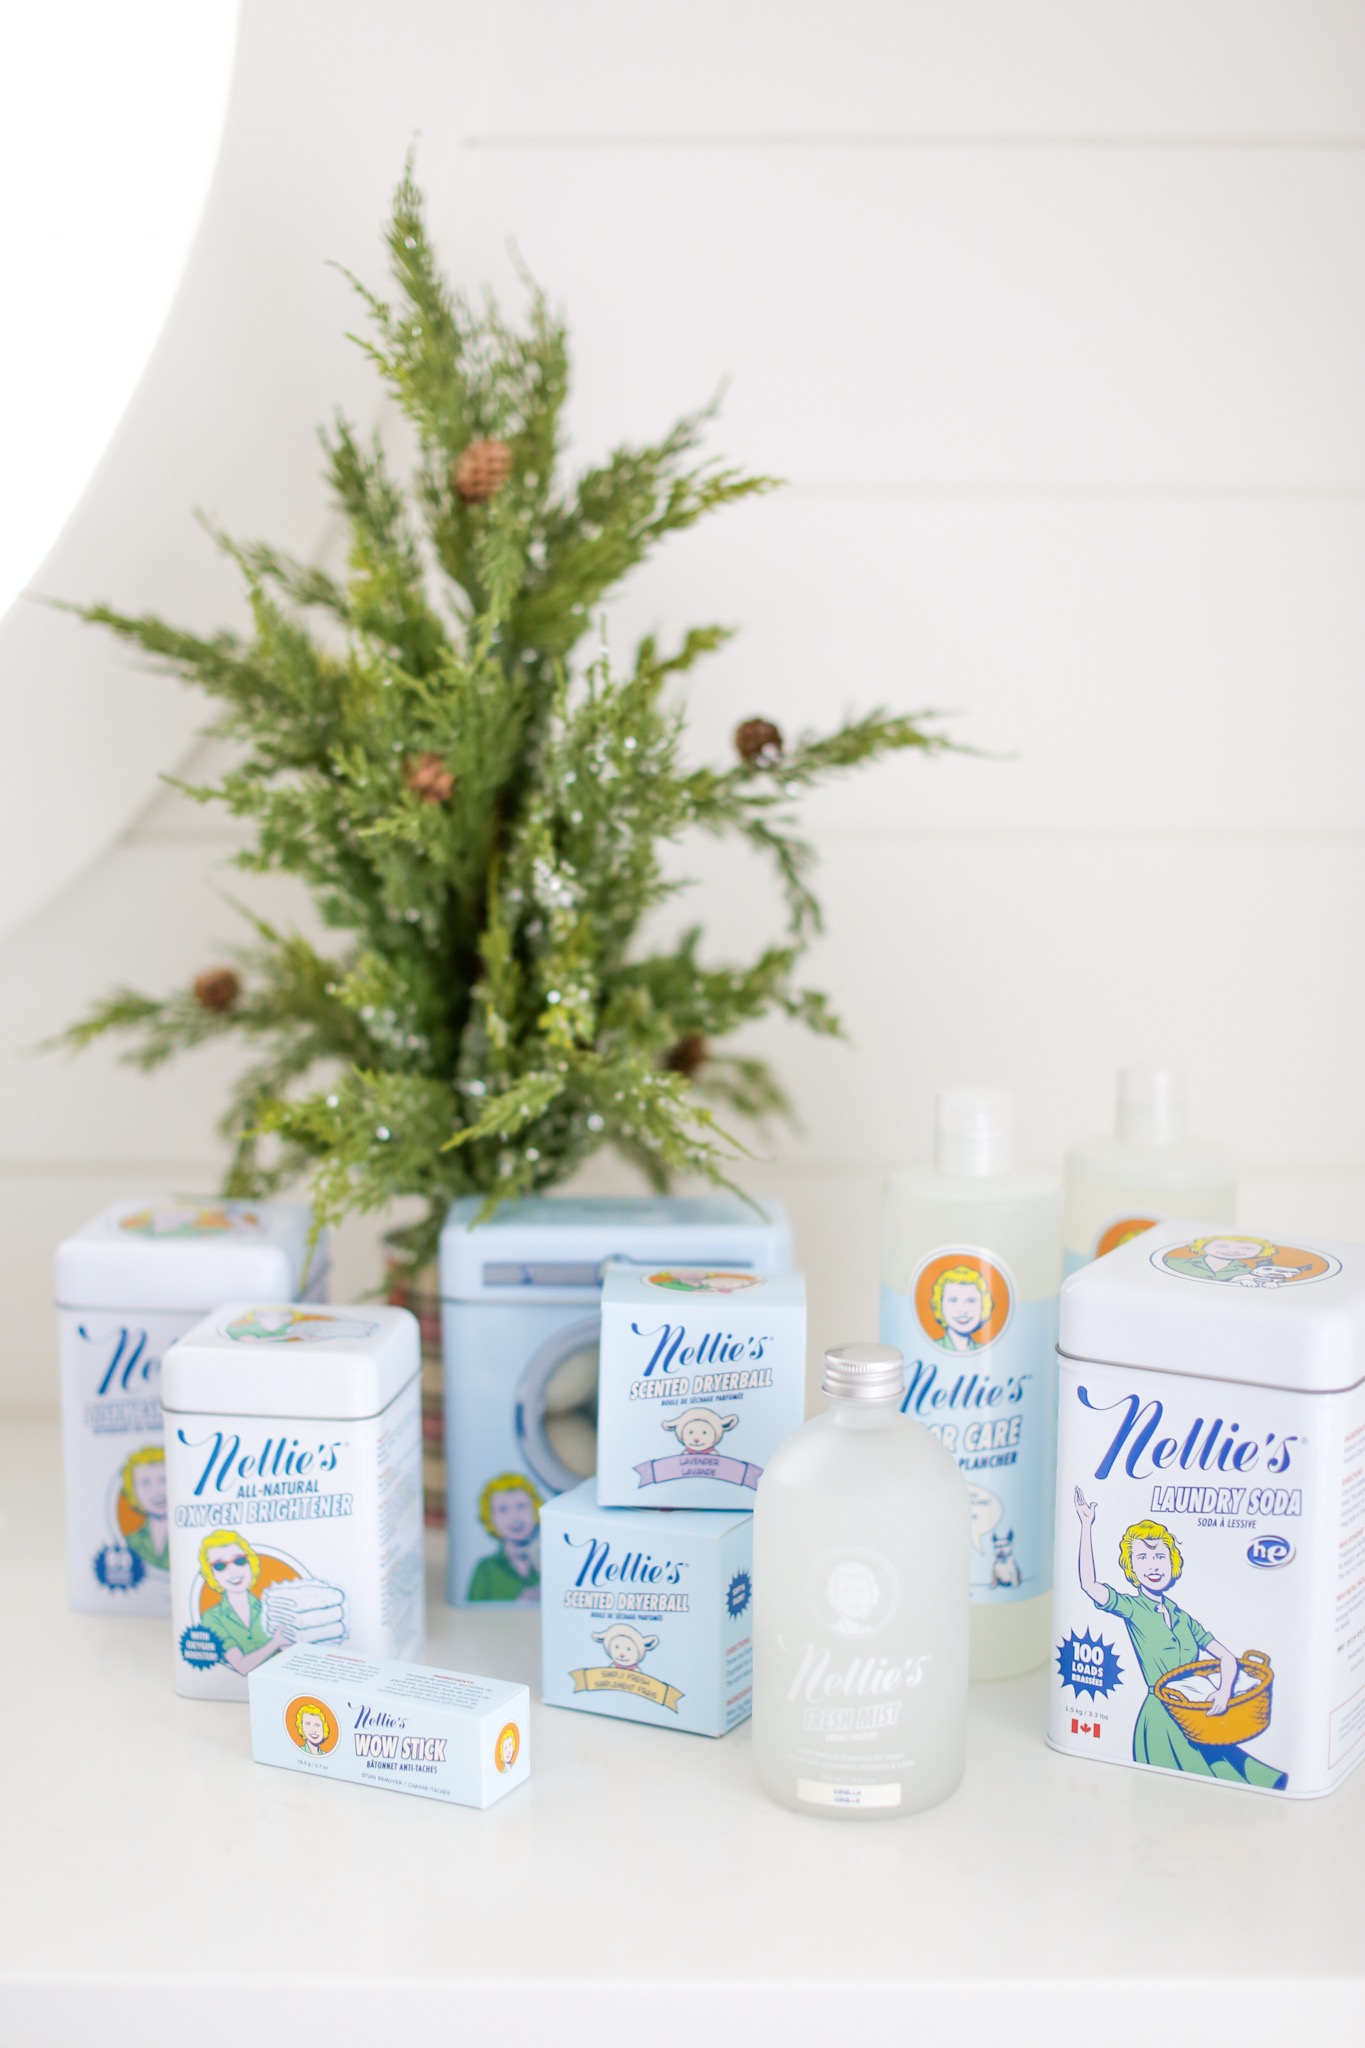 Nellie's giveaway